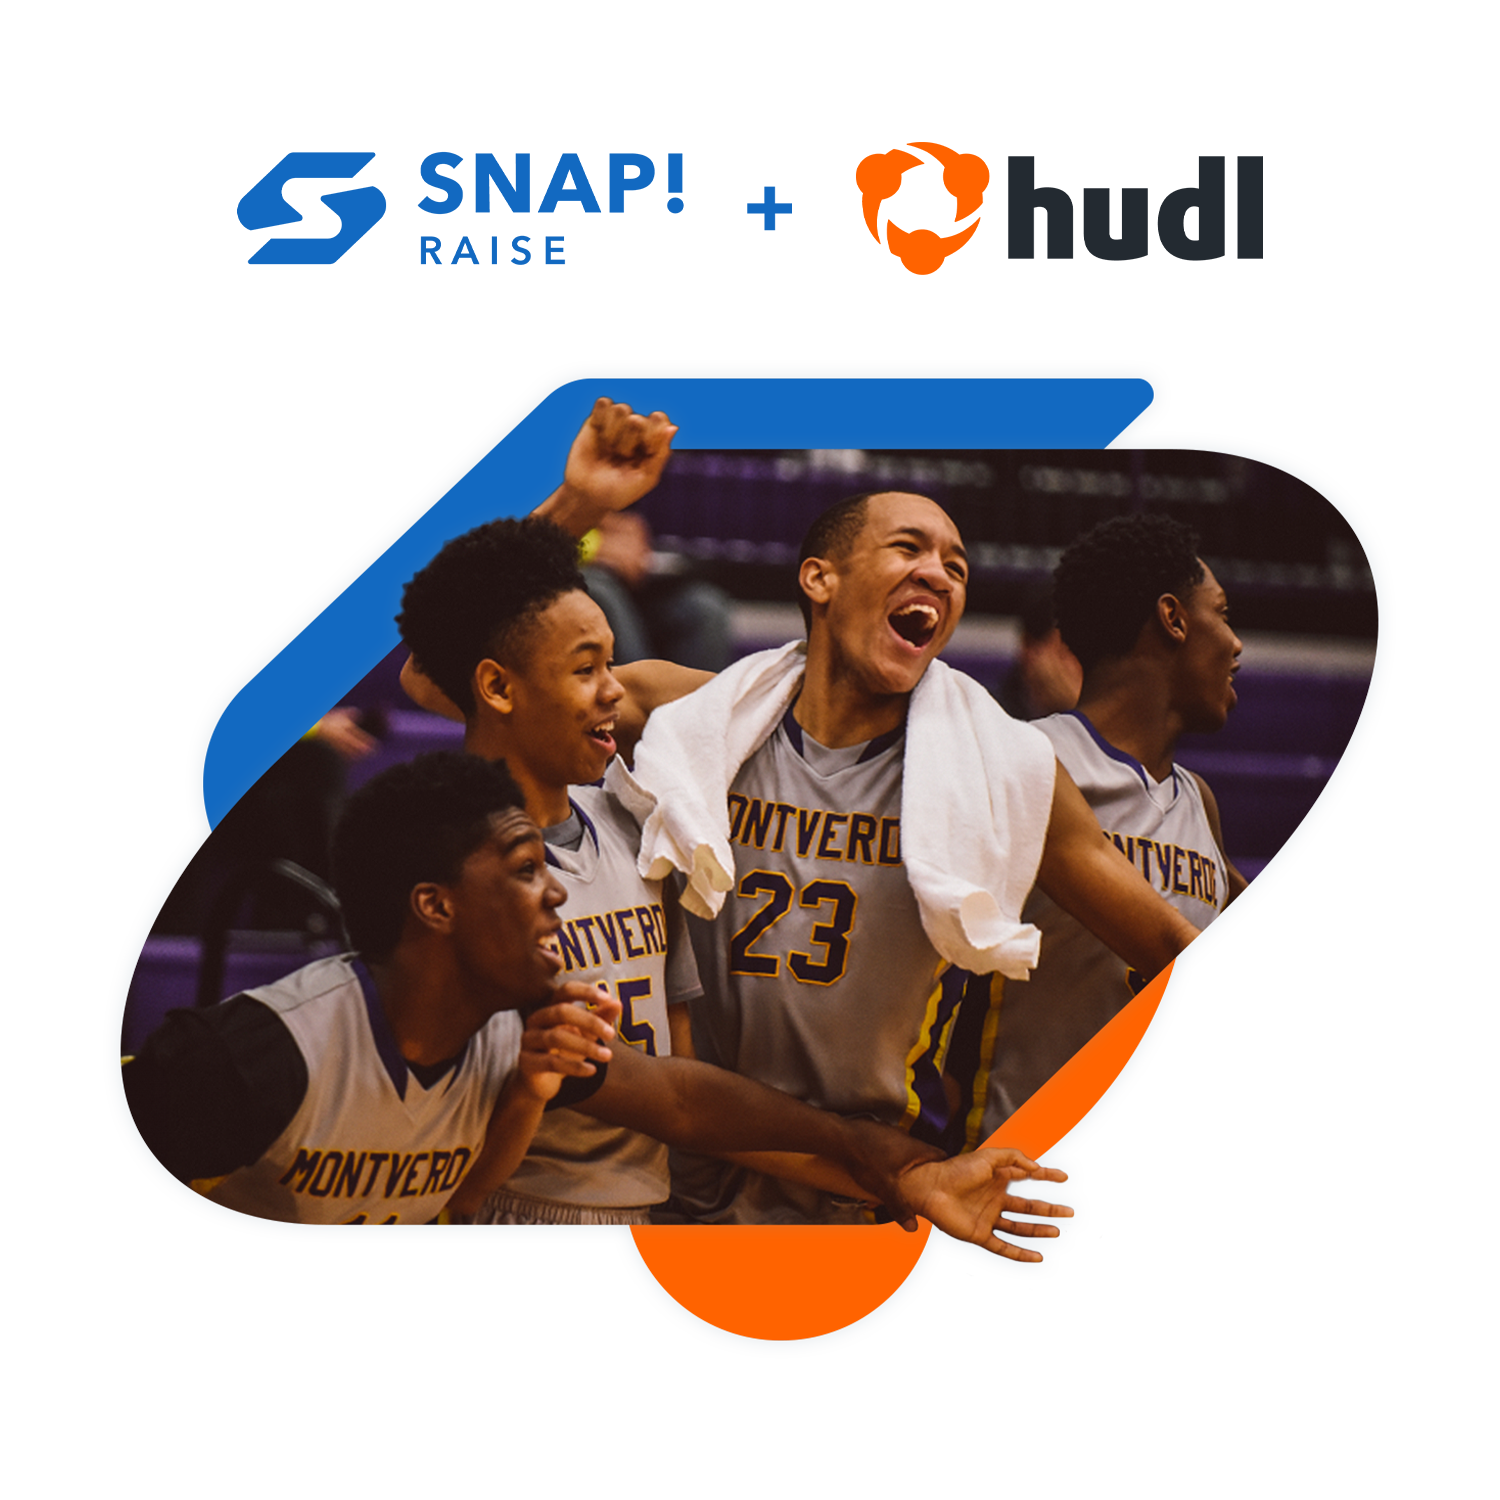 basketball team celebrating with snap raise and hudl logo above it